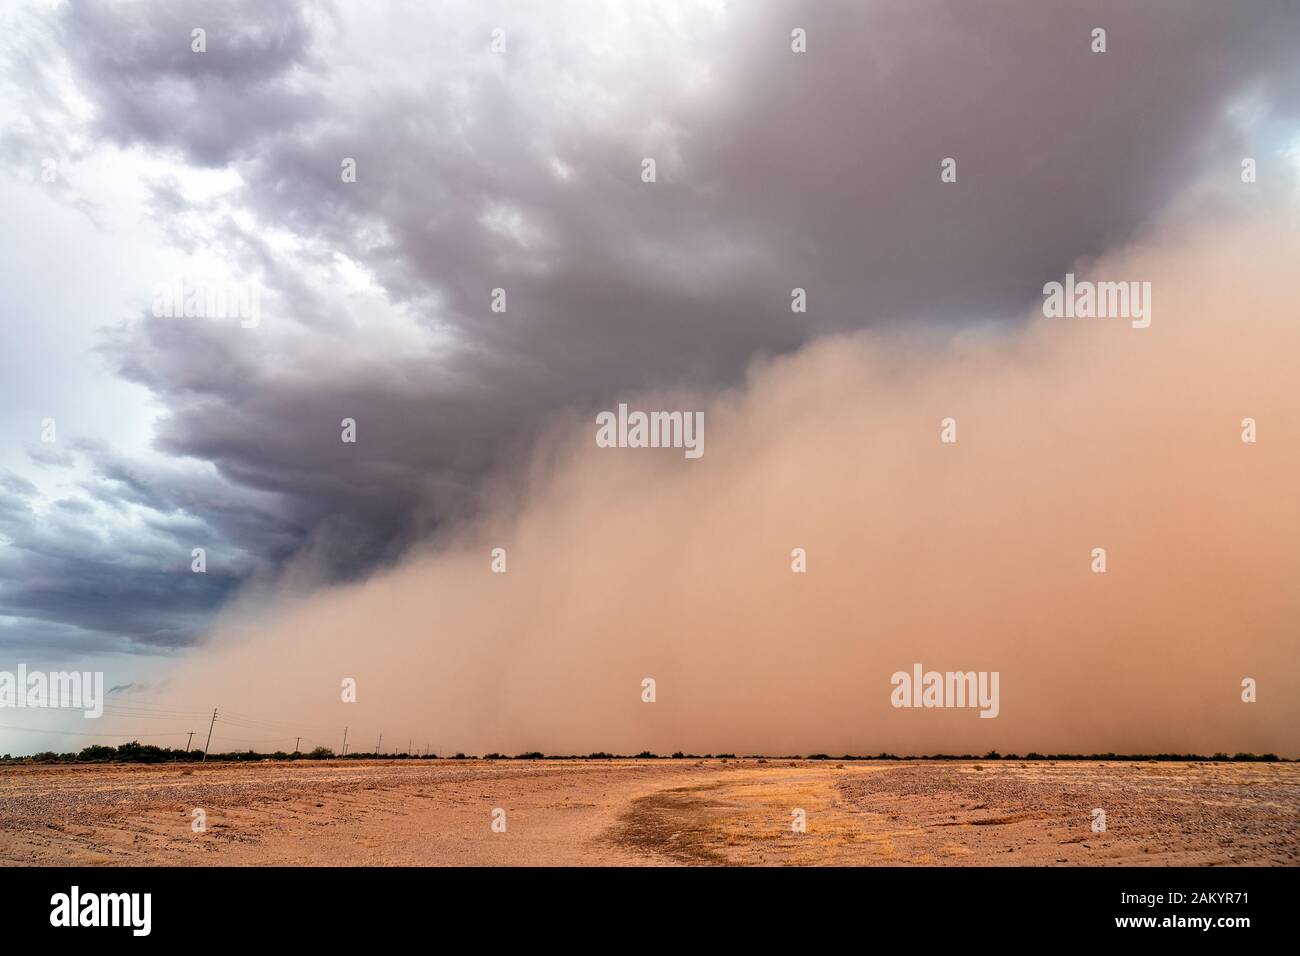 A haboob dust storm pushes across the desert ahead of a strong thunderstorm near Eloy, Arizona Stock Photo